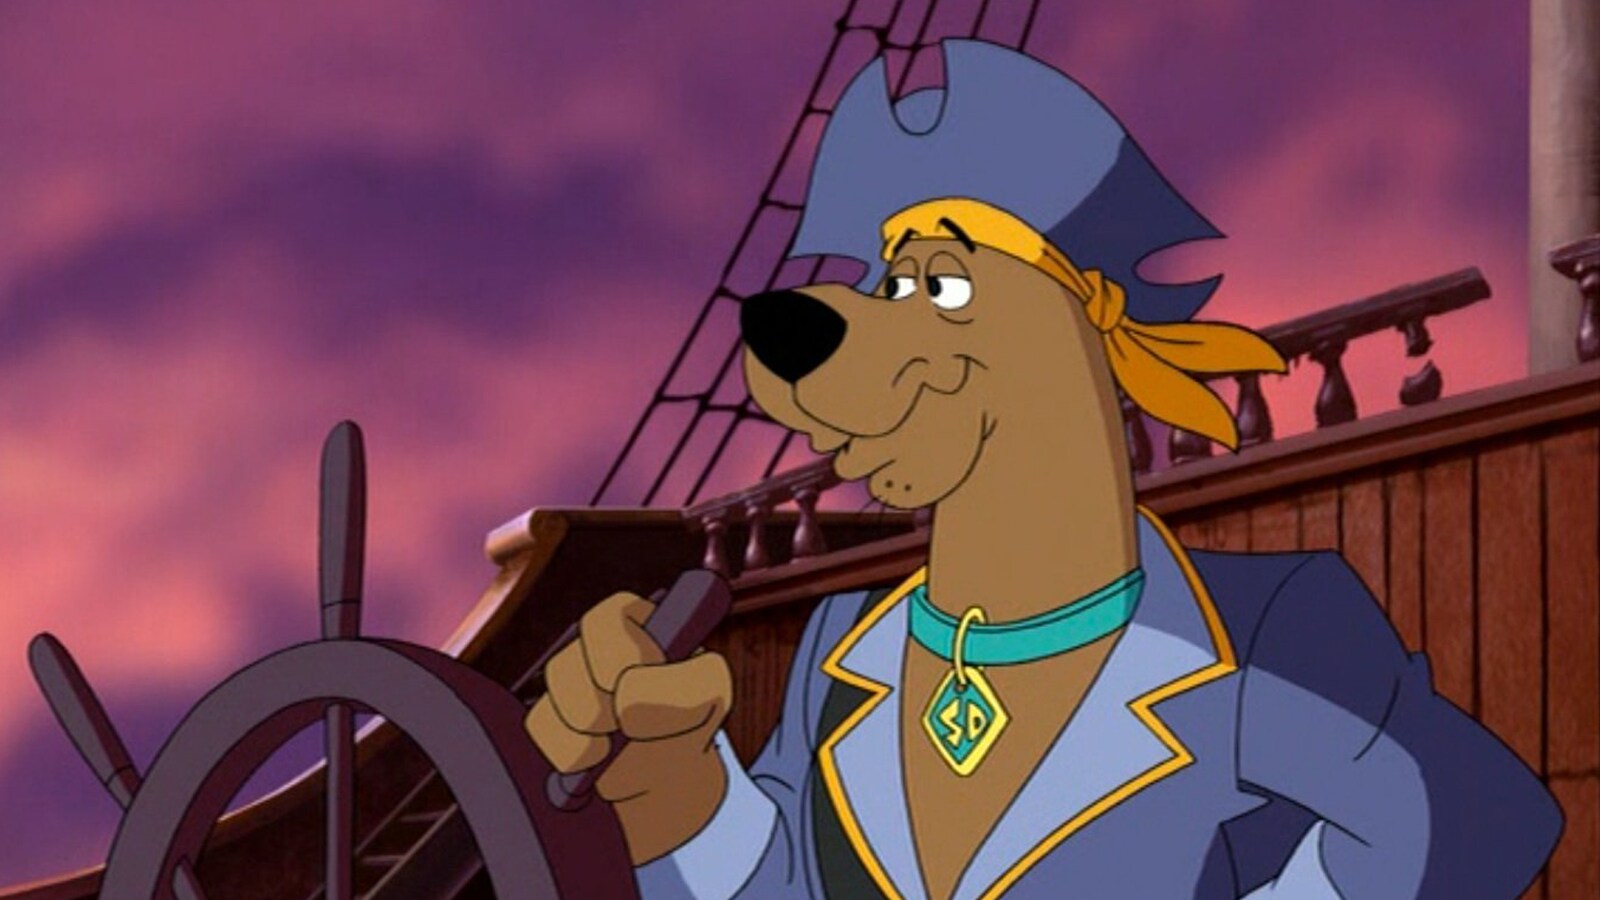 scooby-doo-pirater-i-sigte-2006